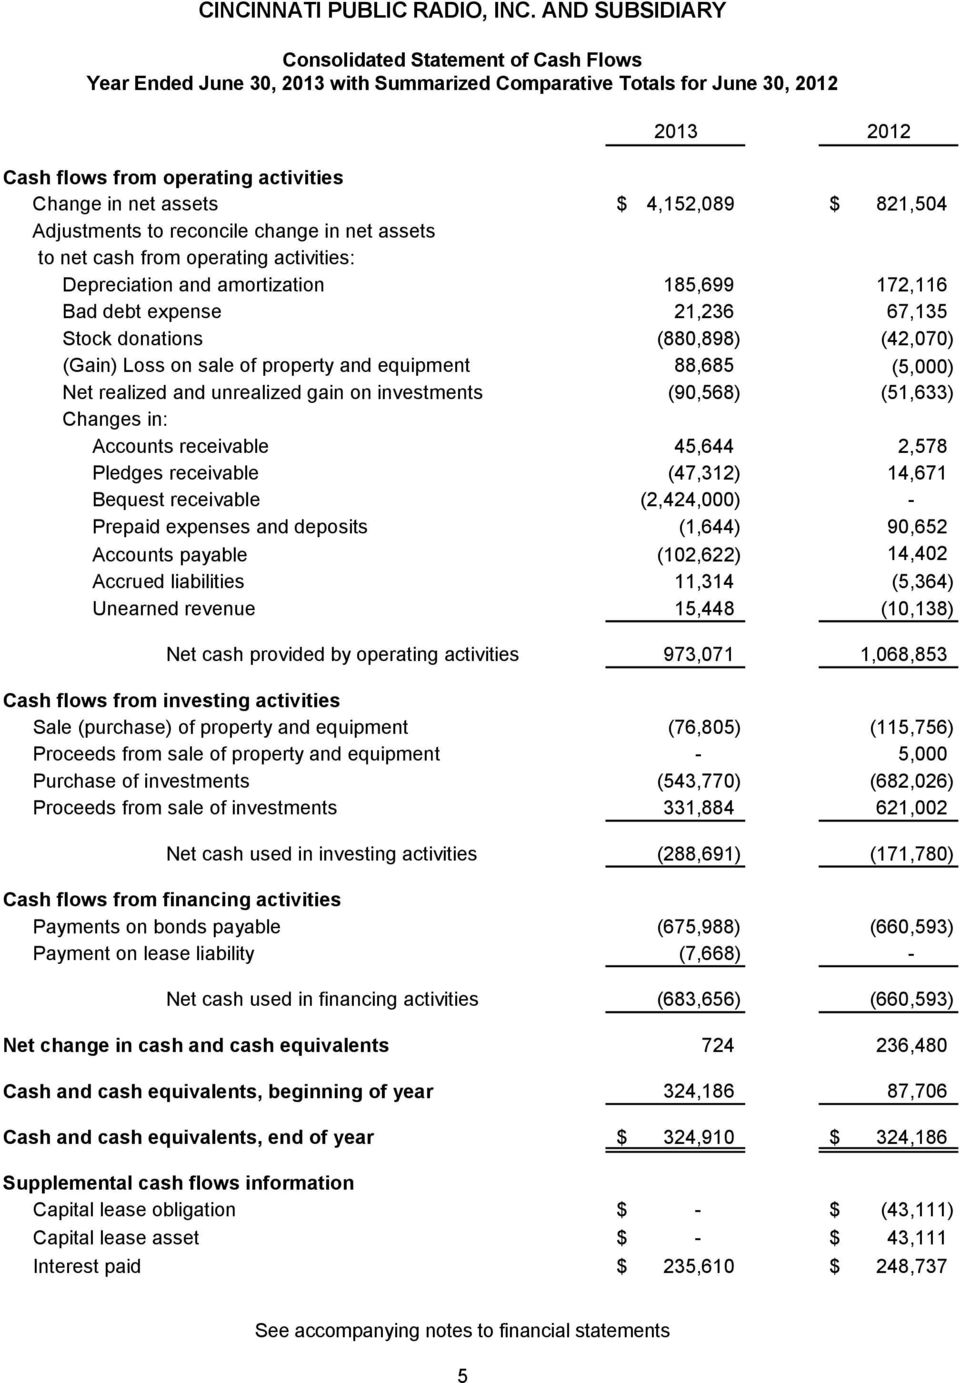 (Gain) Loss on sale of property and equipment 88,685 (5,000) Net realized and unrealized gain on investments (90,568) (51,633) Changes in: Accounts receivable 45,644 2,578 Pledges receivable (47,312)